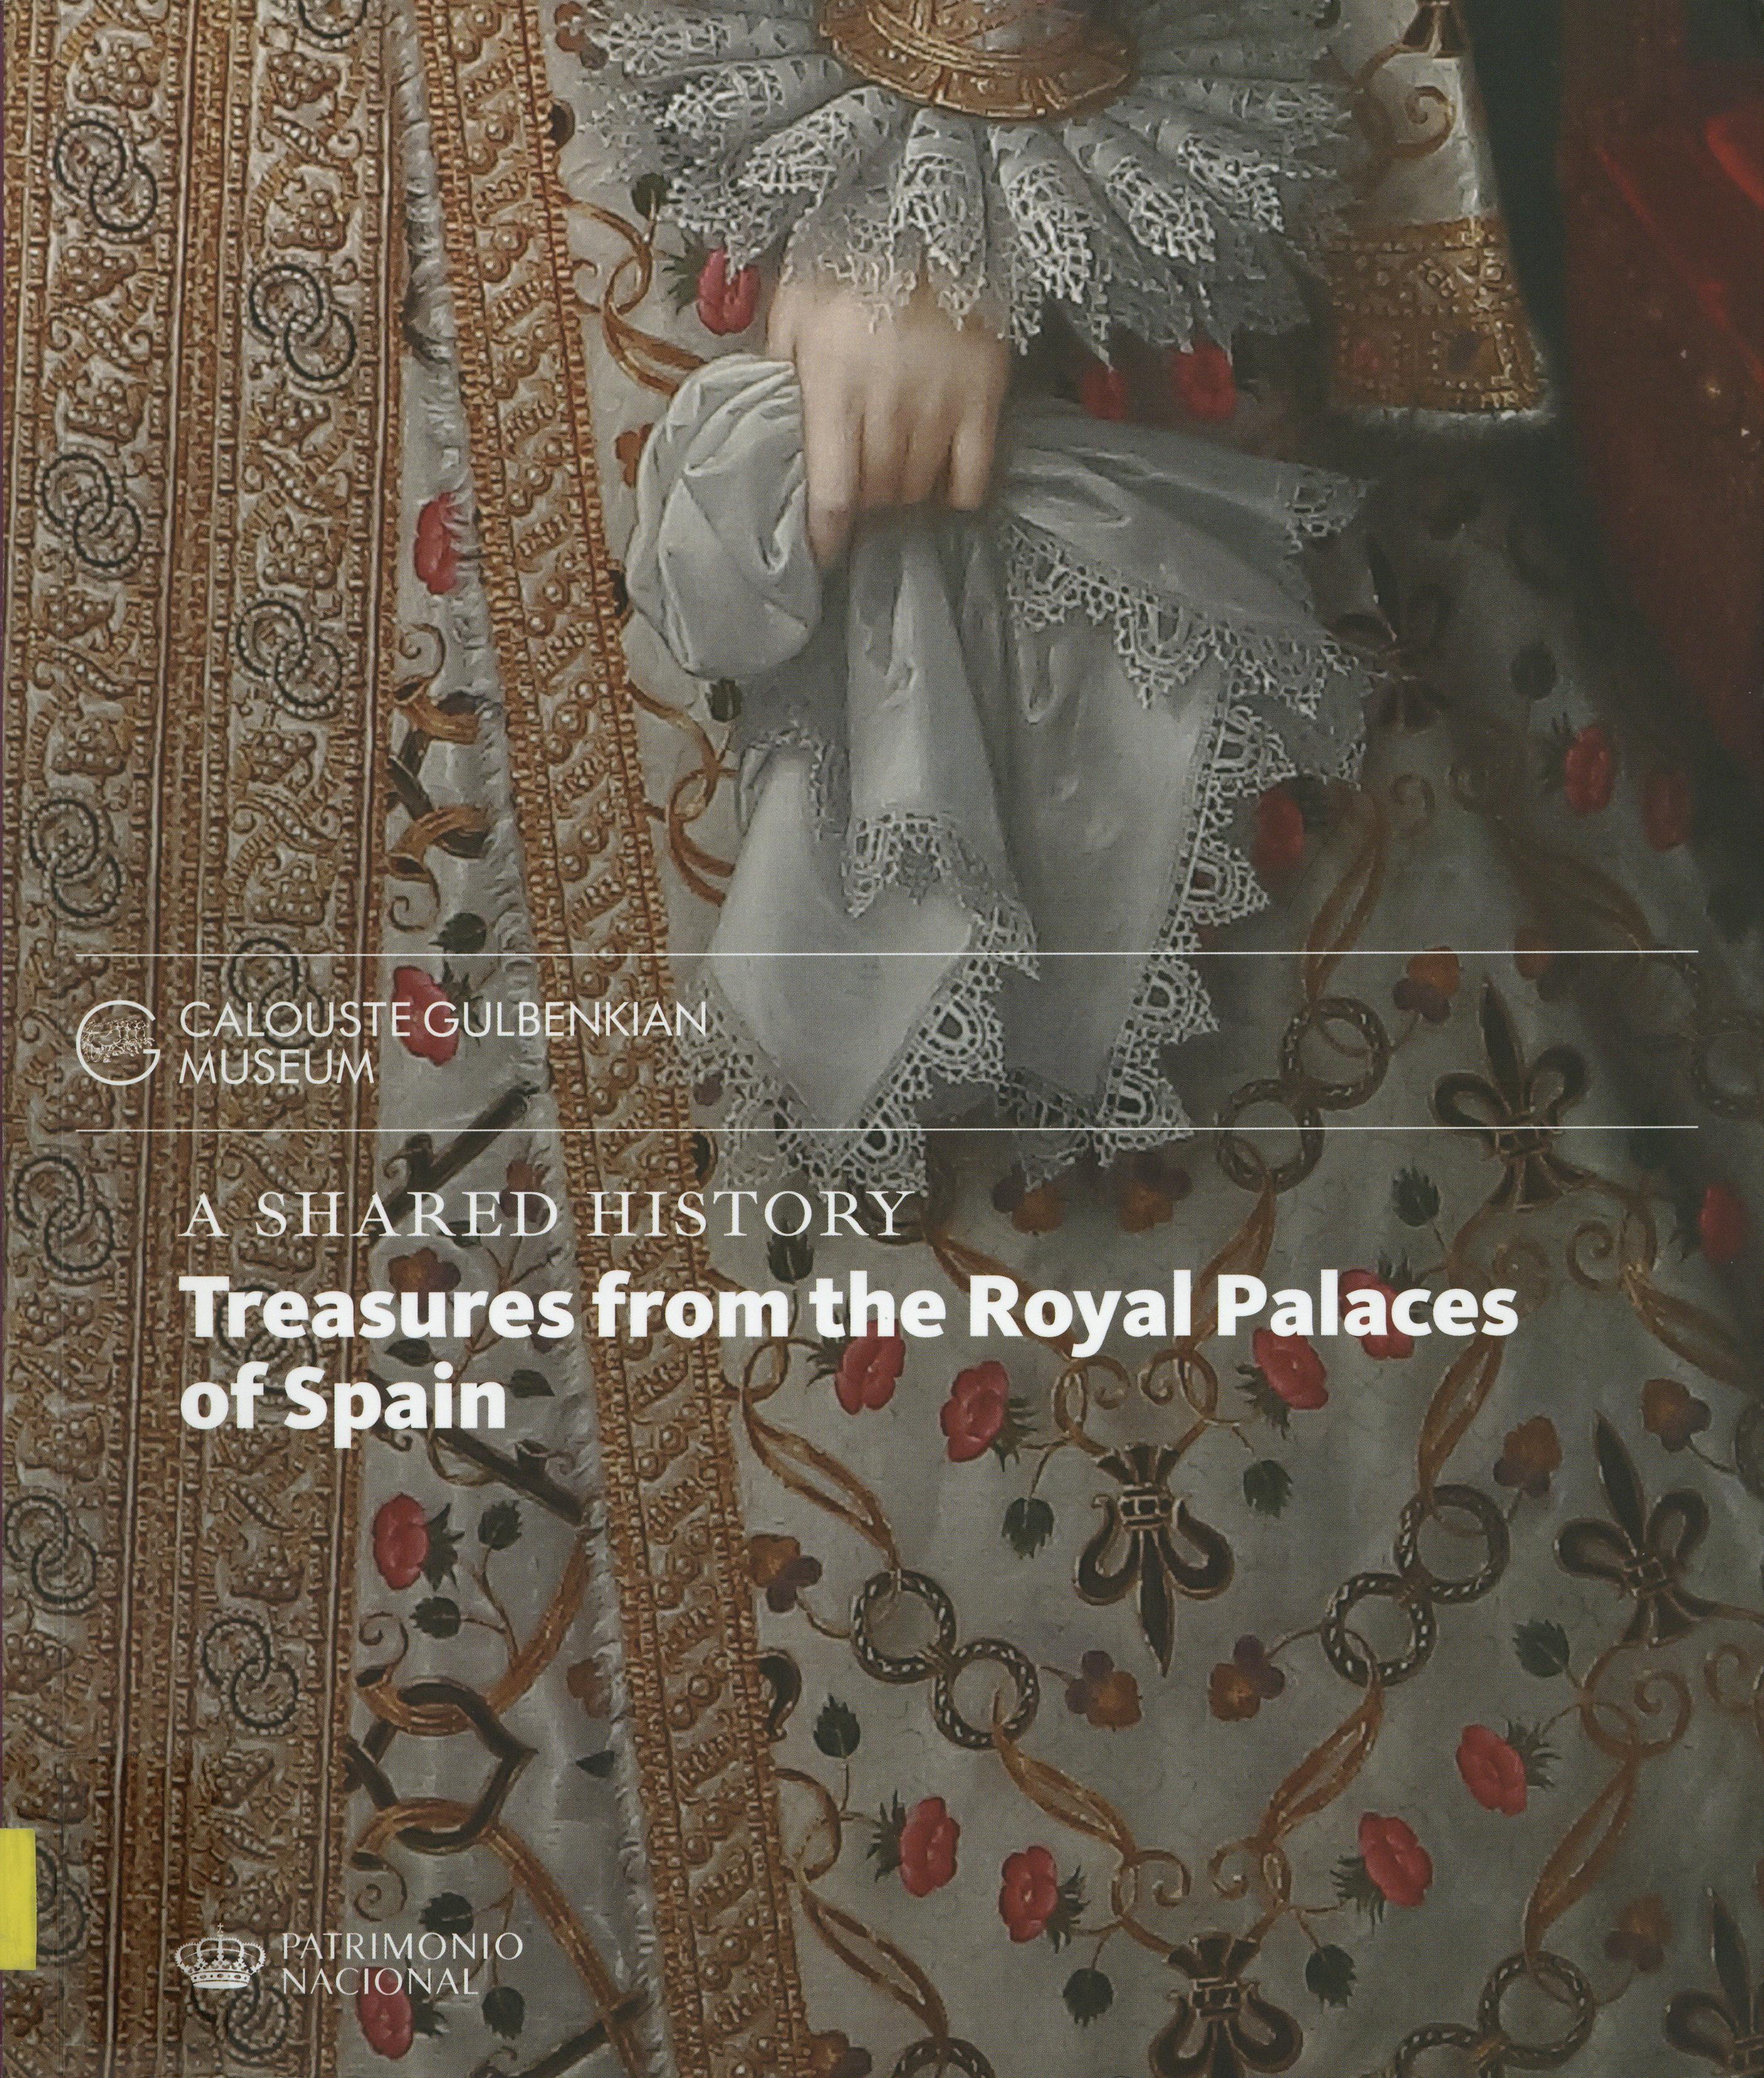 A Shared History. Treasures from the Royal Palaces of Spain